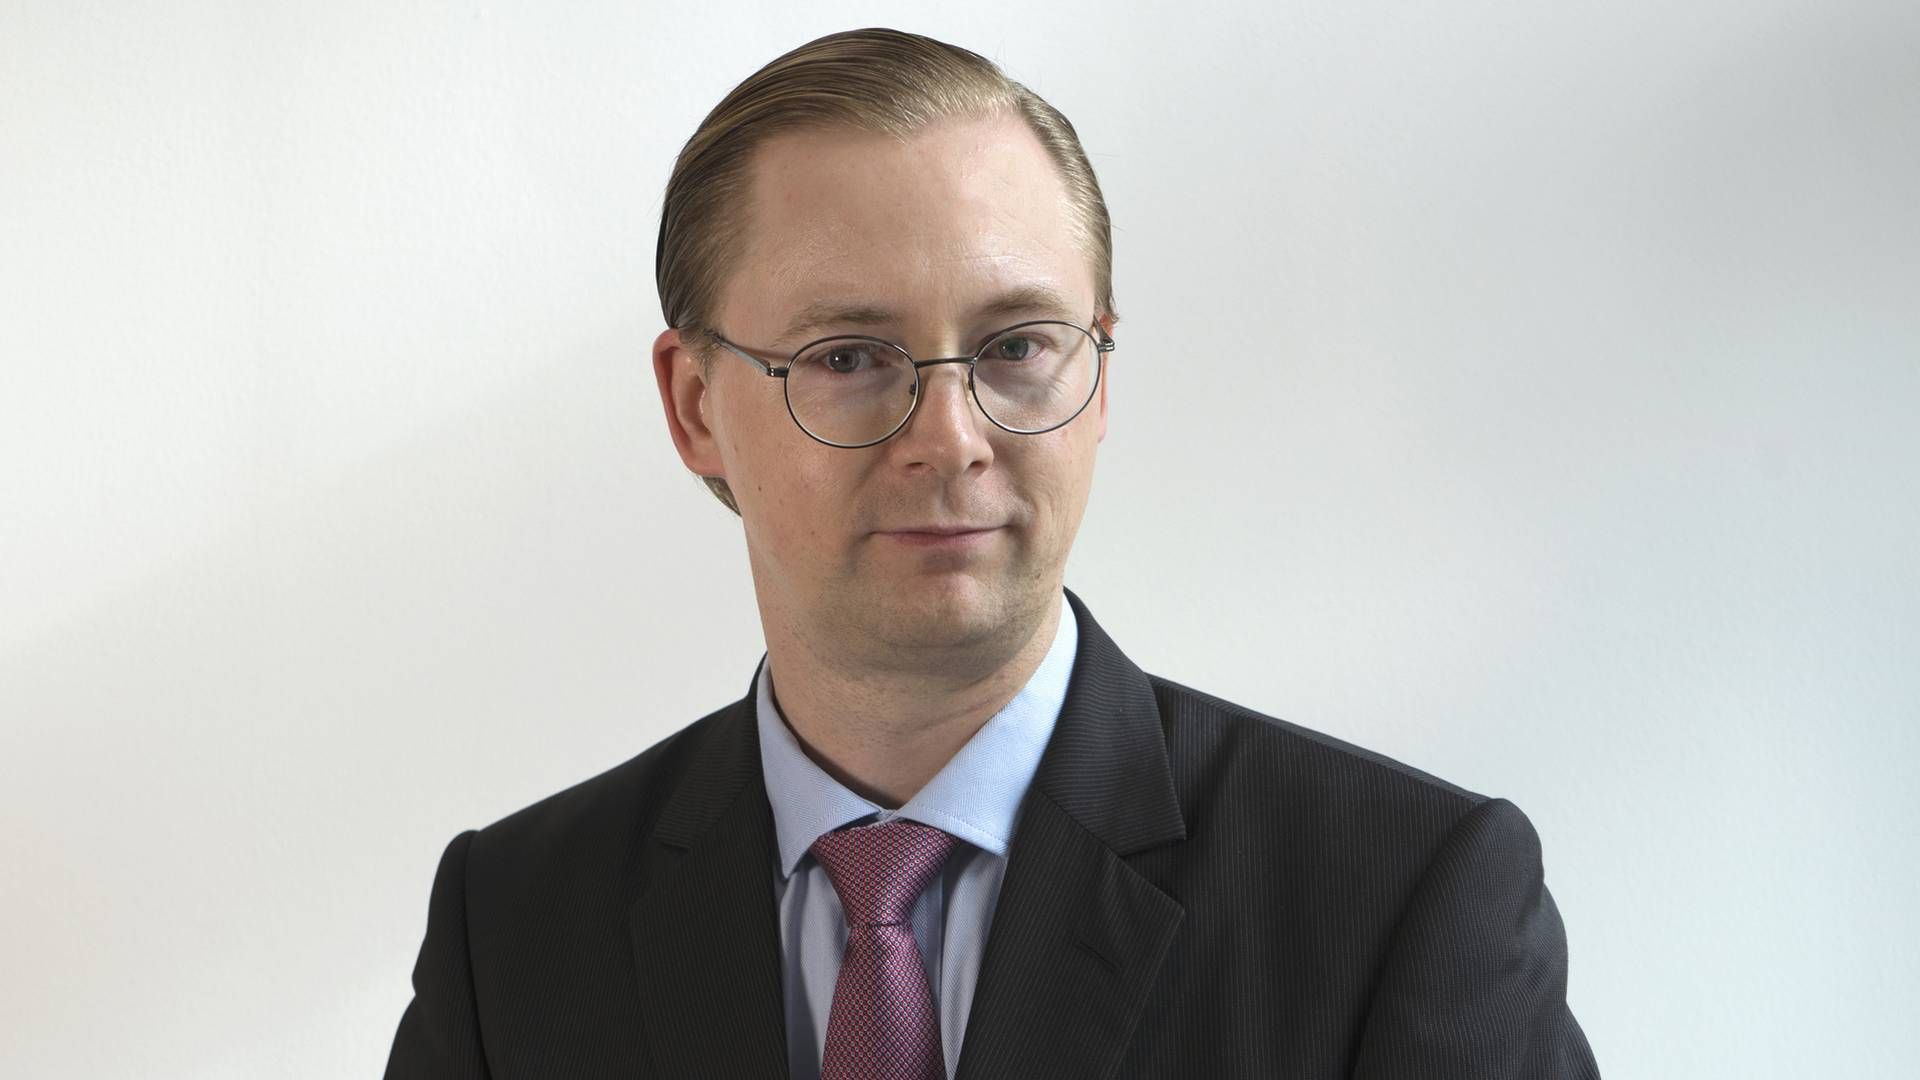 Christian Lundström Tjurhufvud has managed global equity portfolios, been senior advisor to the Swedish government, holds a PhD focused on hedge fund strategies and, until recently, was the gatekeeper of the largest fund platform in the Nordic region. | Photo: PR / Pensionsmyndigheten